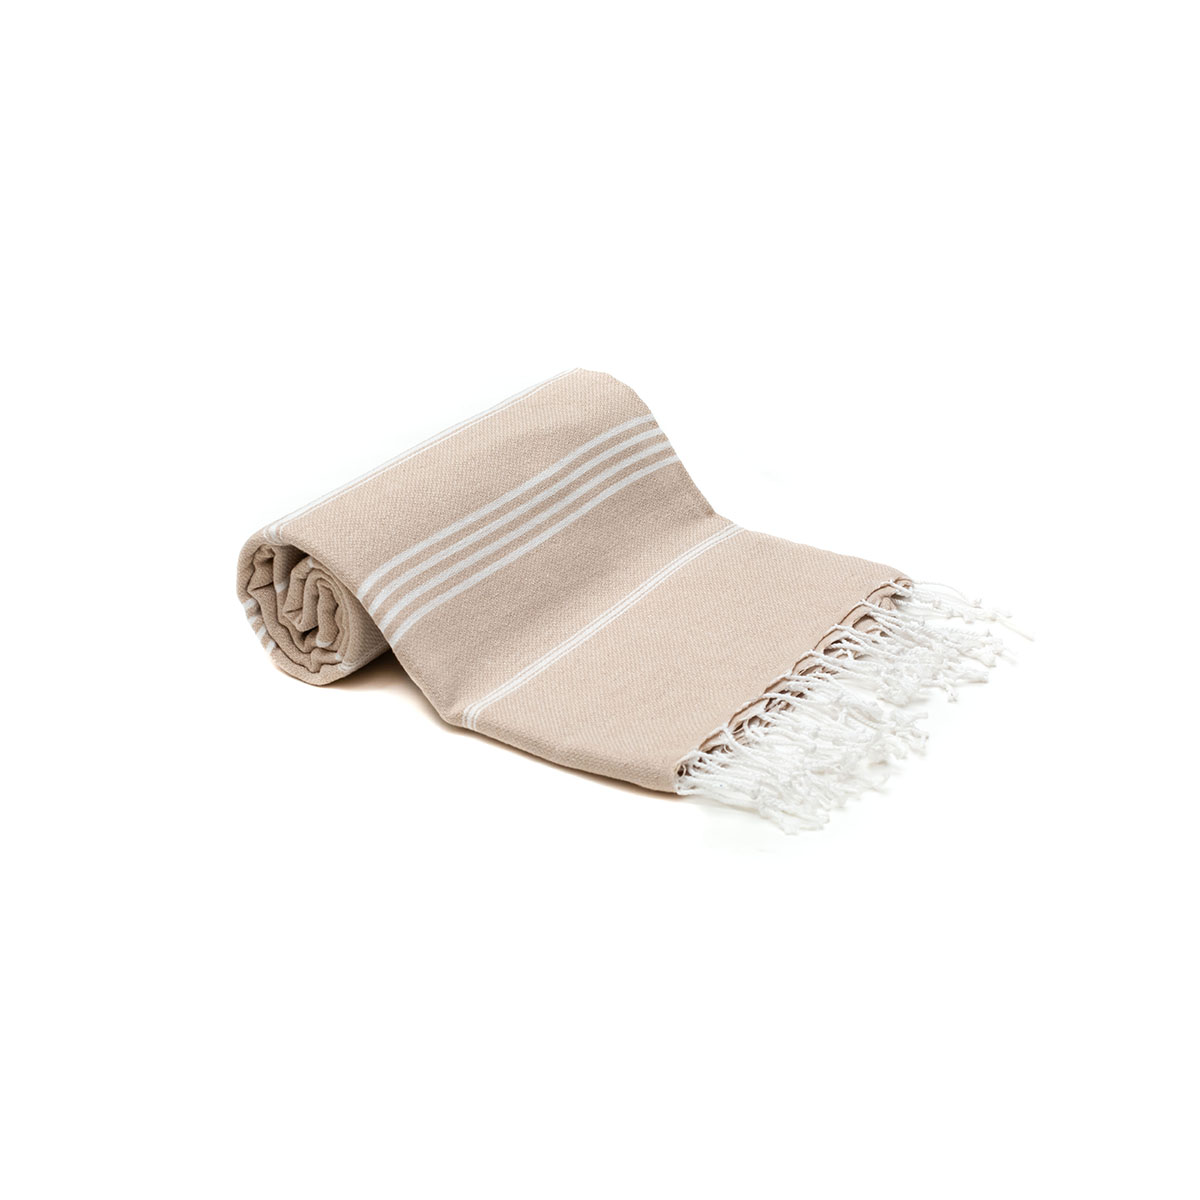 The Sonat Turkish Towel in 2023  Towels beige, White hand towels